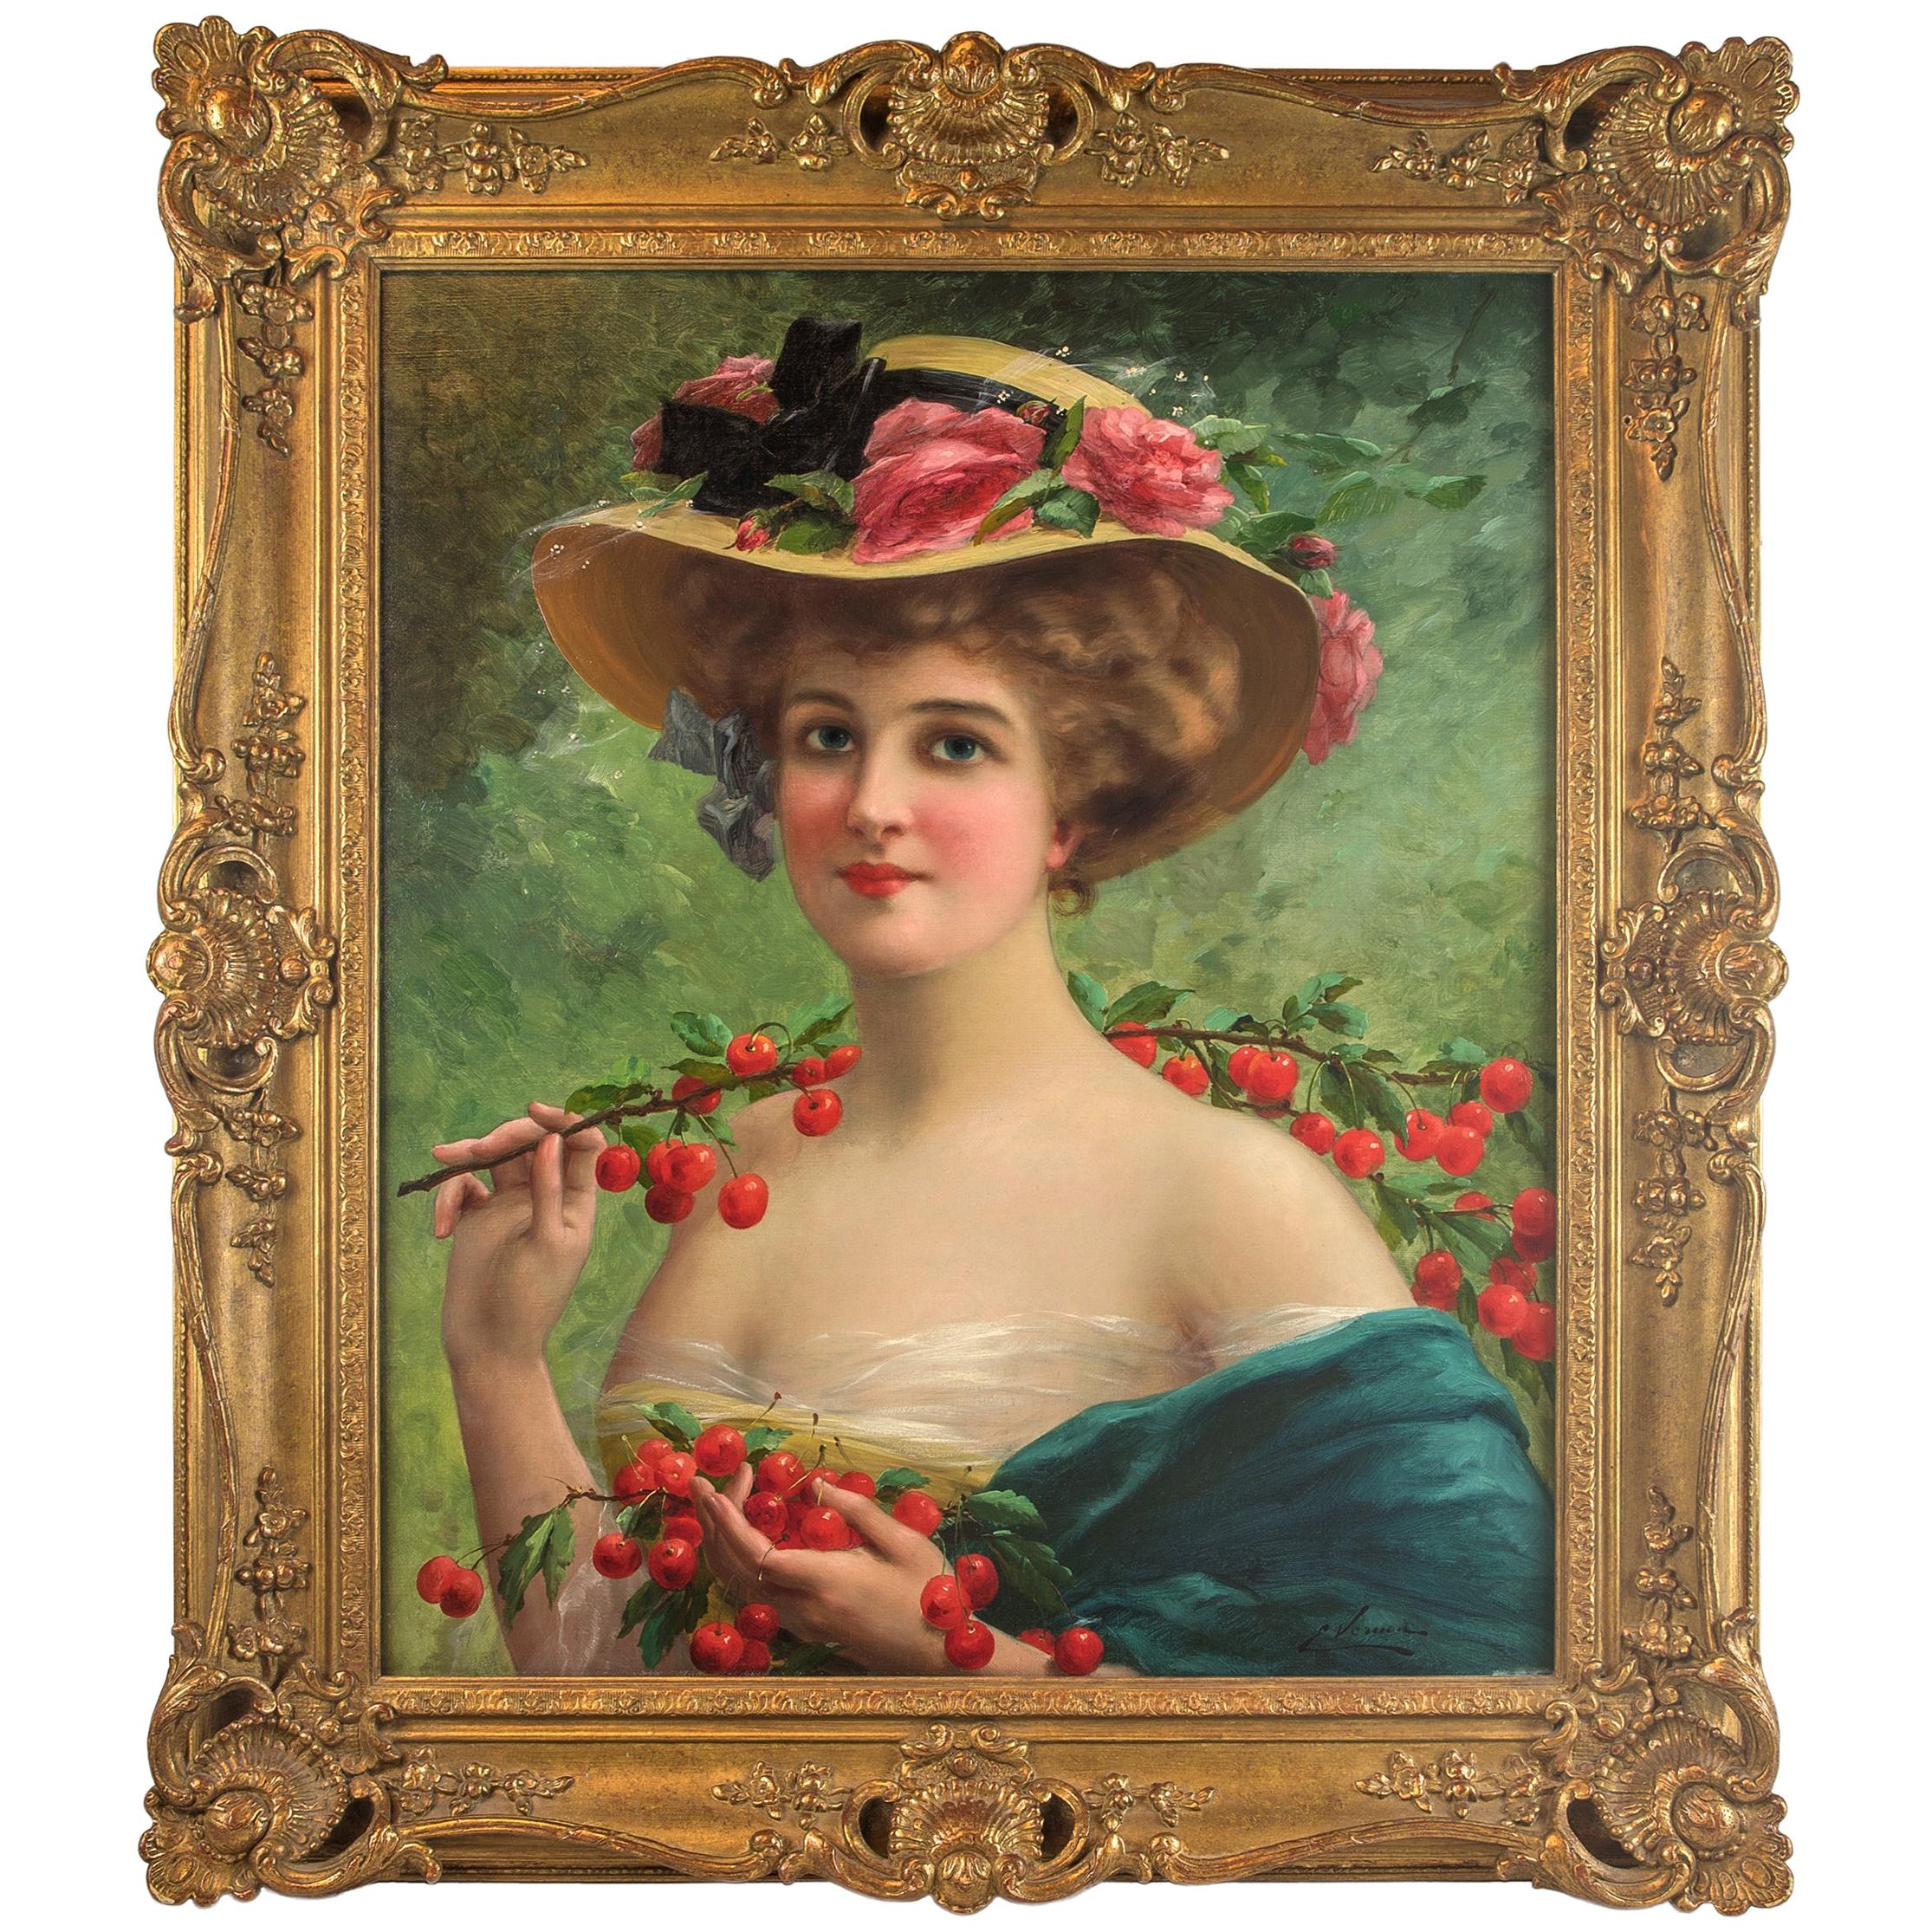 Youthful Beauty, Oil on Canvas, Signed E Vernon, French